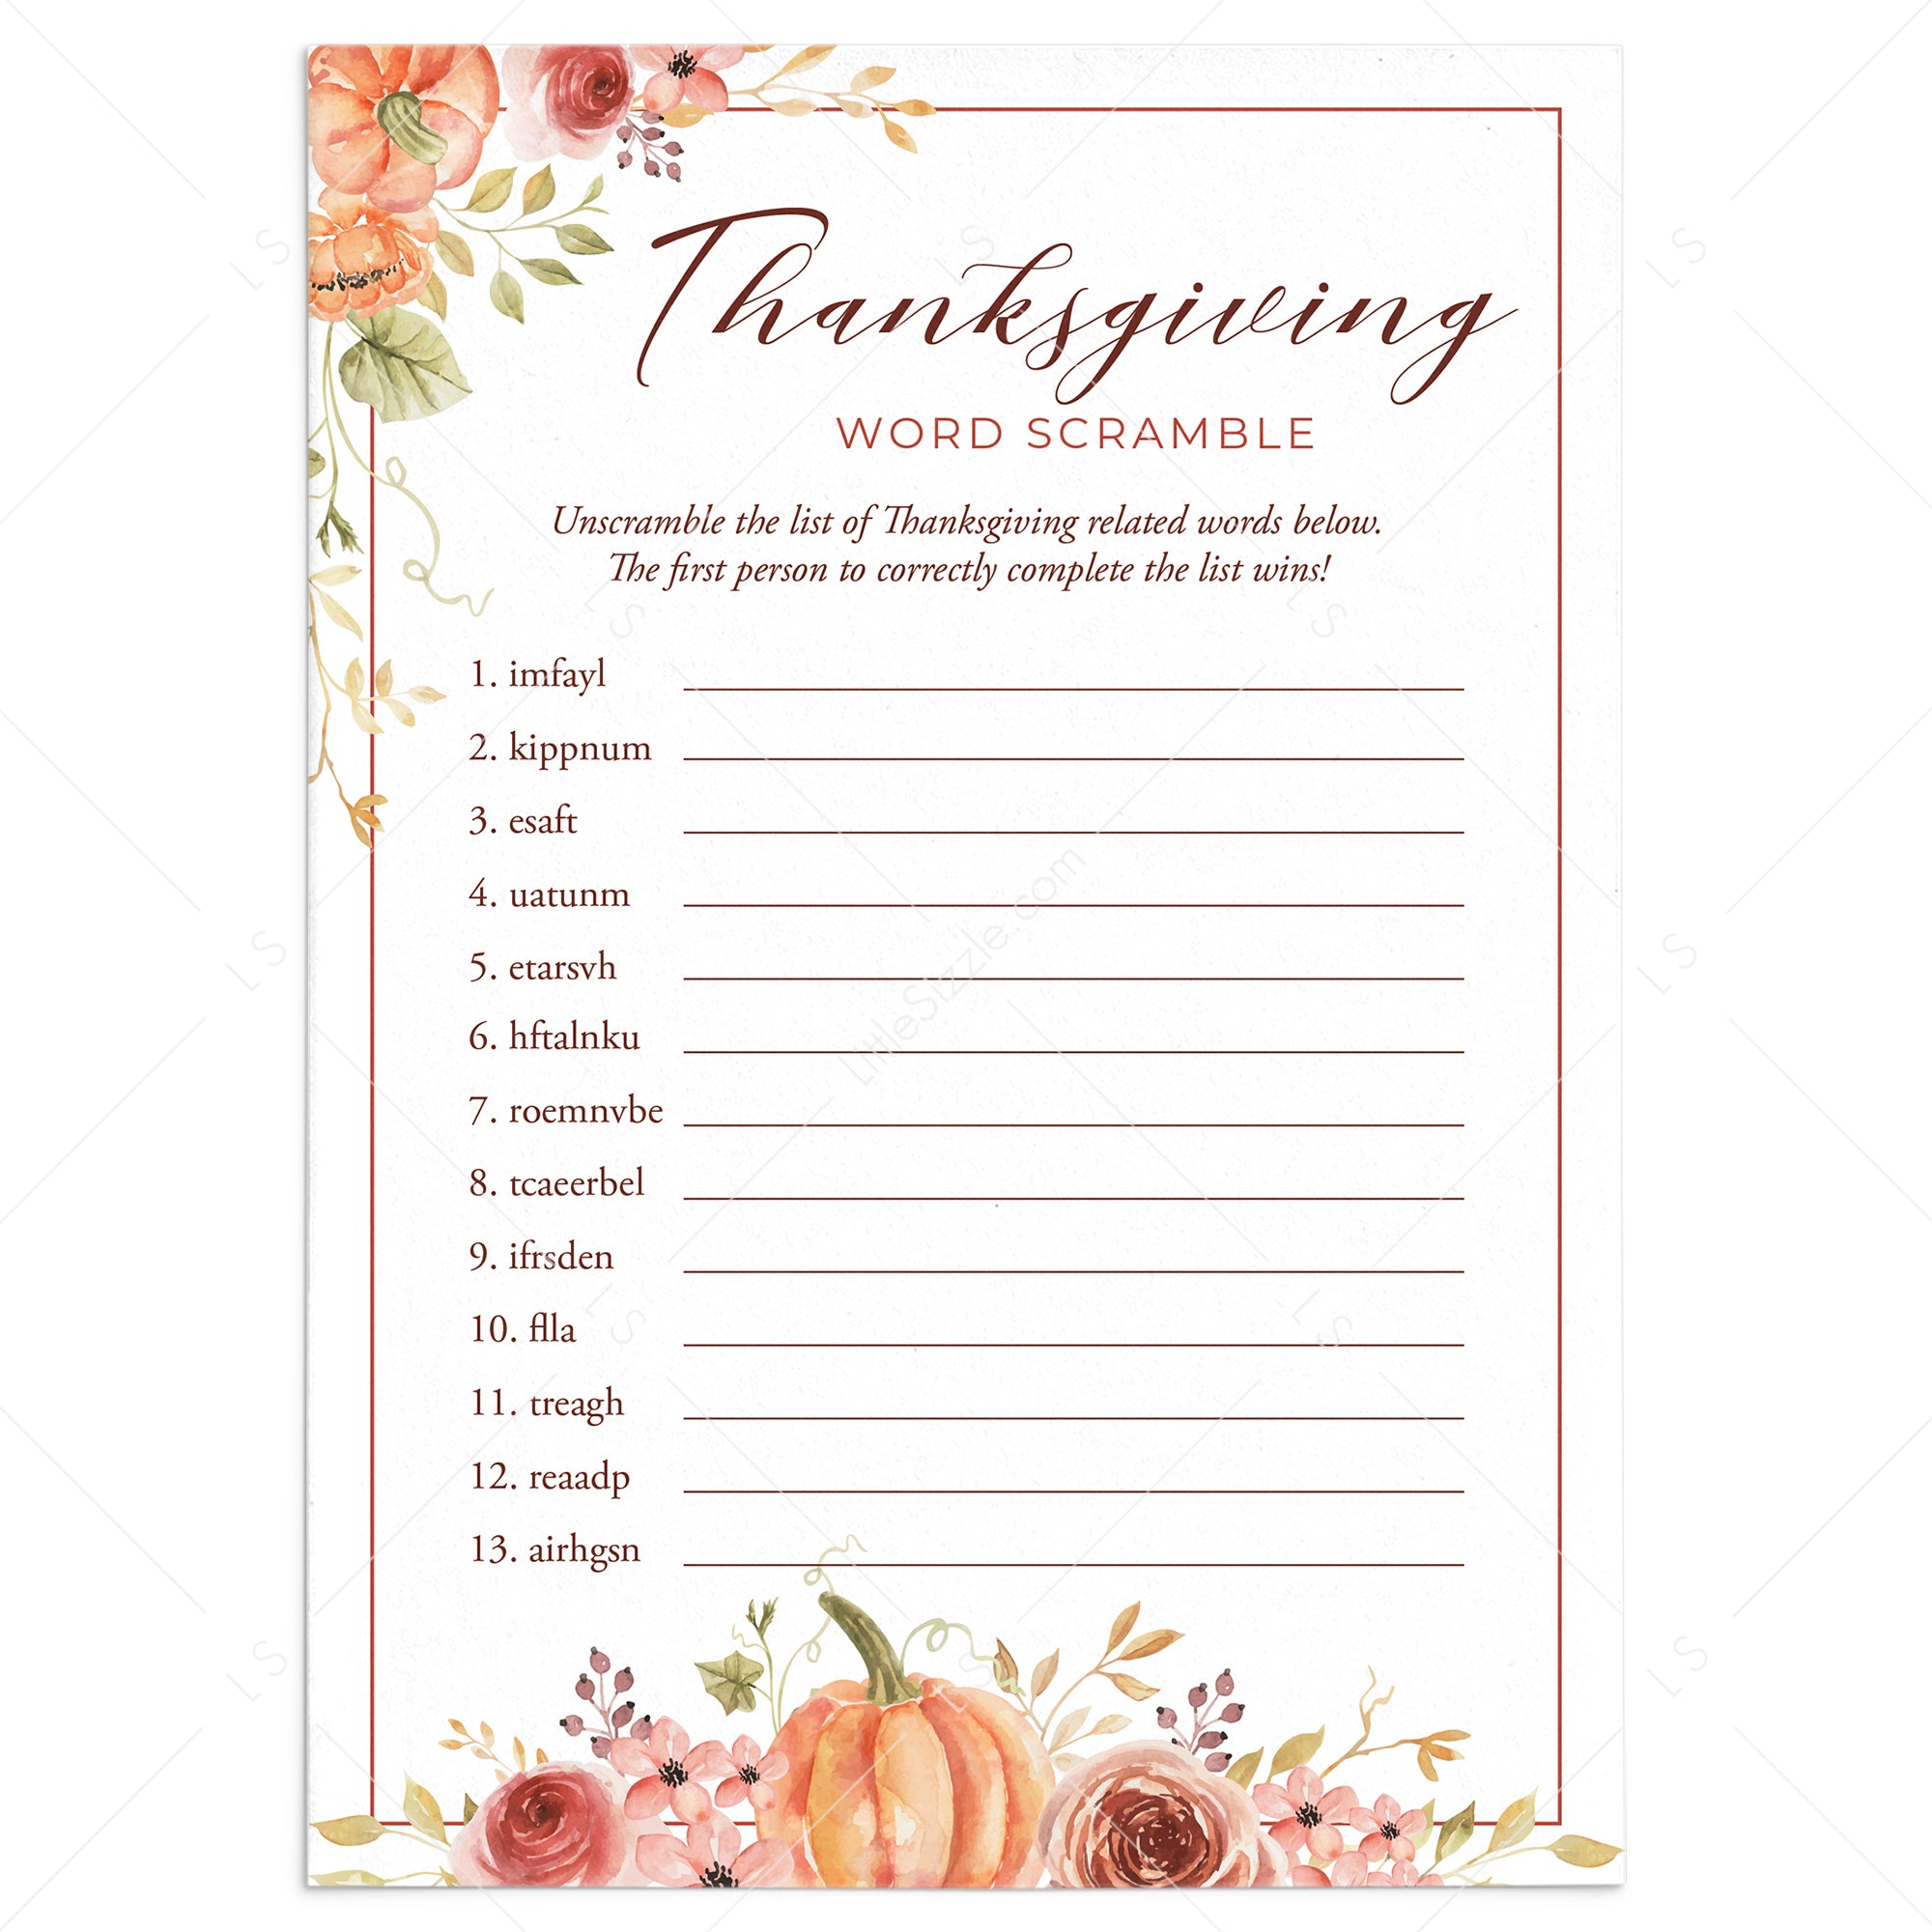 Thanksgiving Word Scramble with Answer Key Printable by LittleSizzle